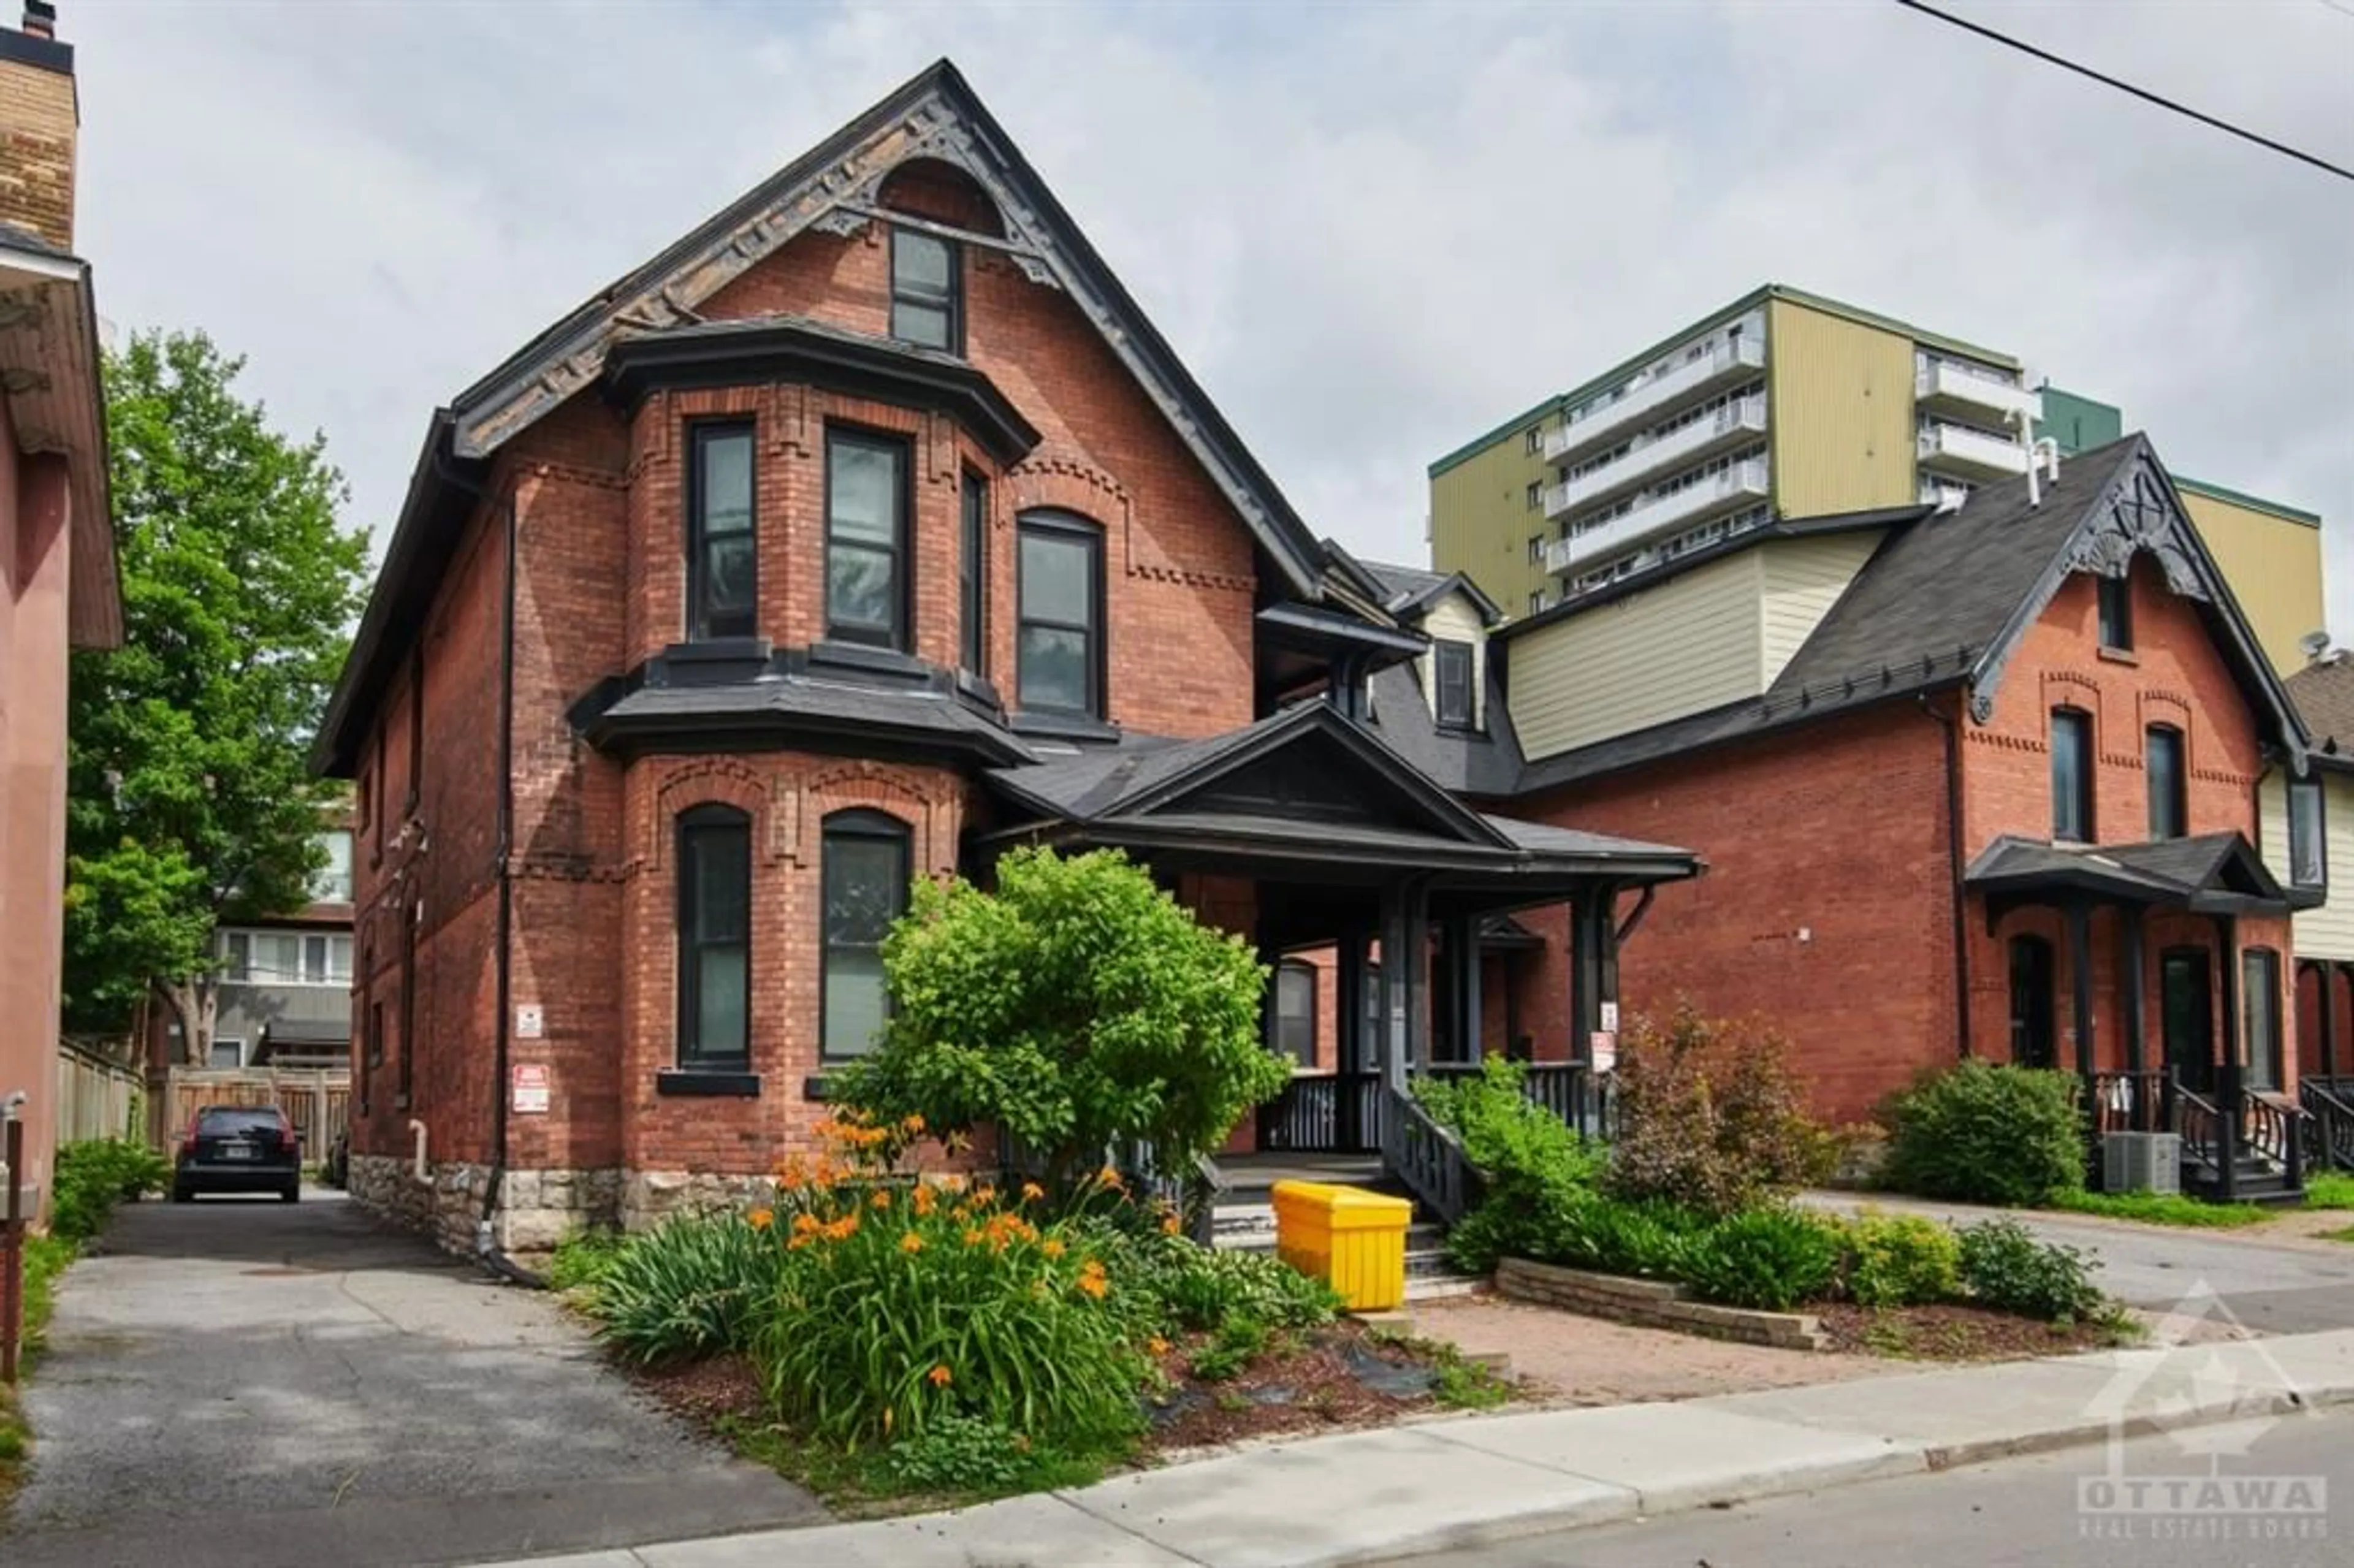 Home with brick exterior material for 275 MCLEOD St #2, Ottawa Ontario K2P 1A1